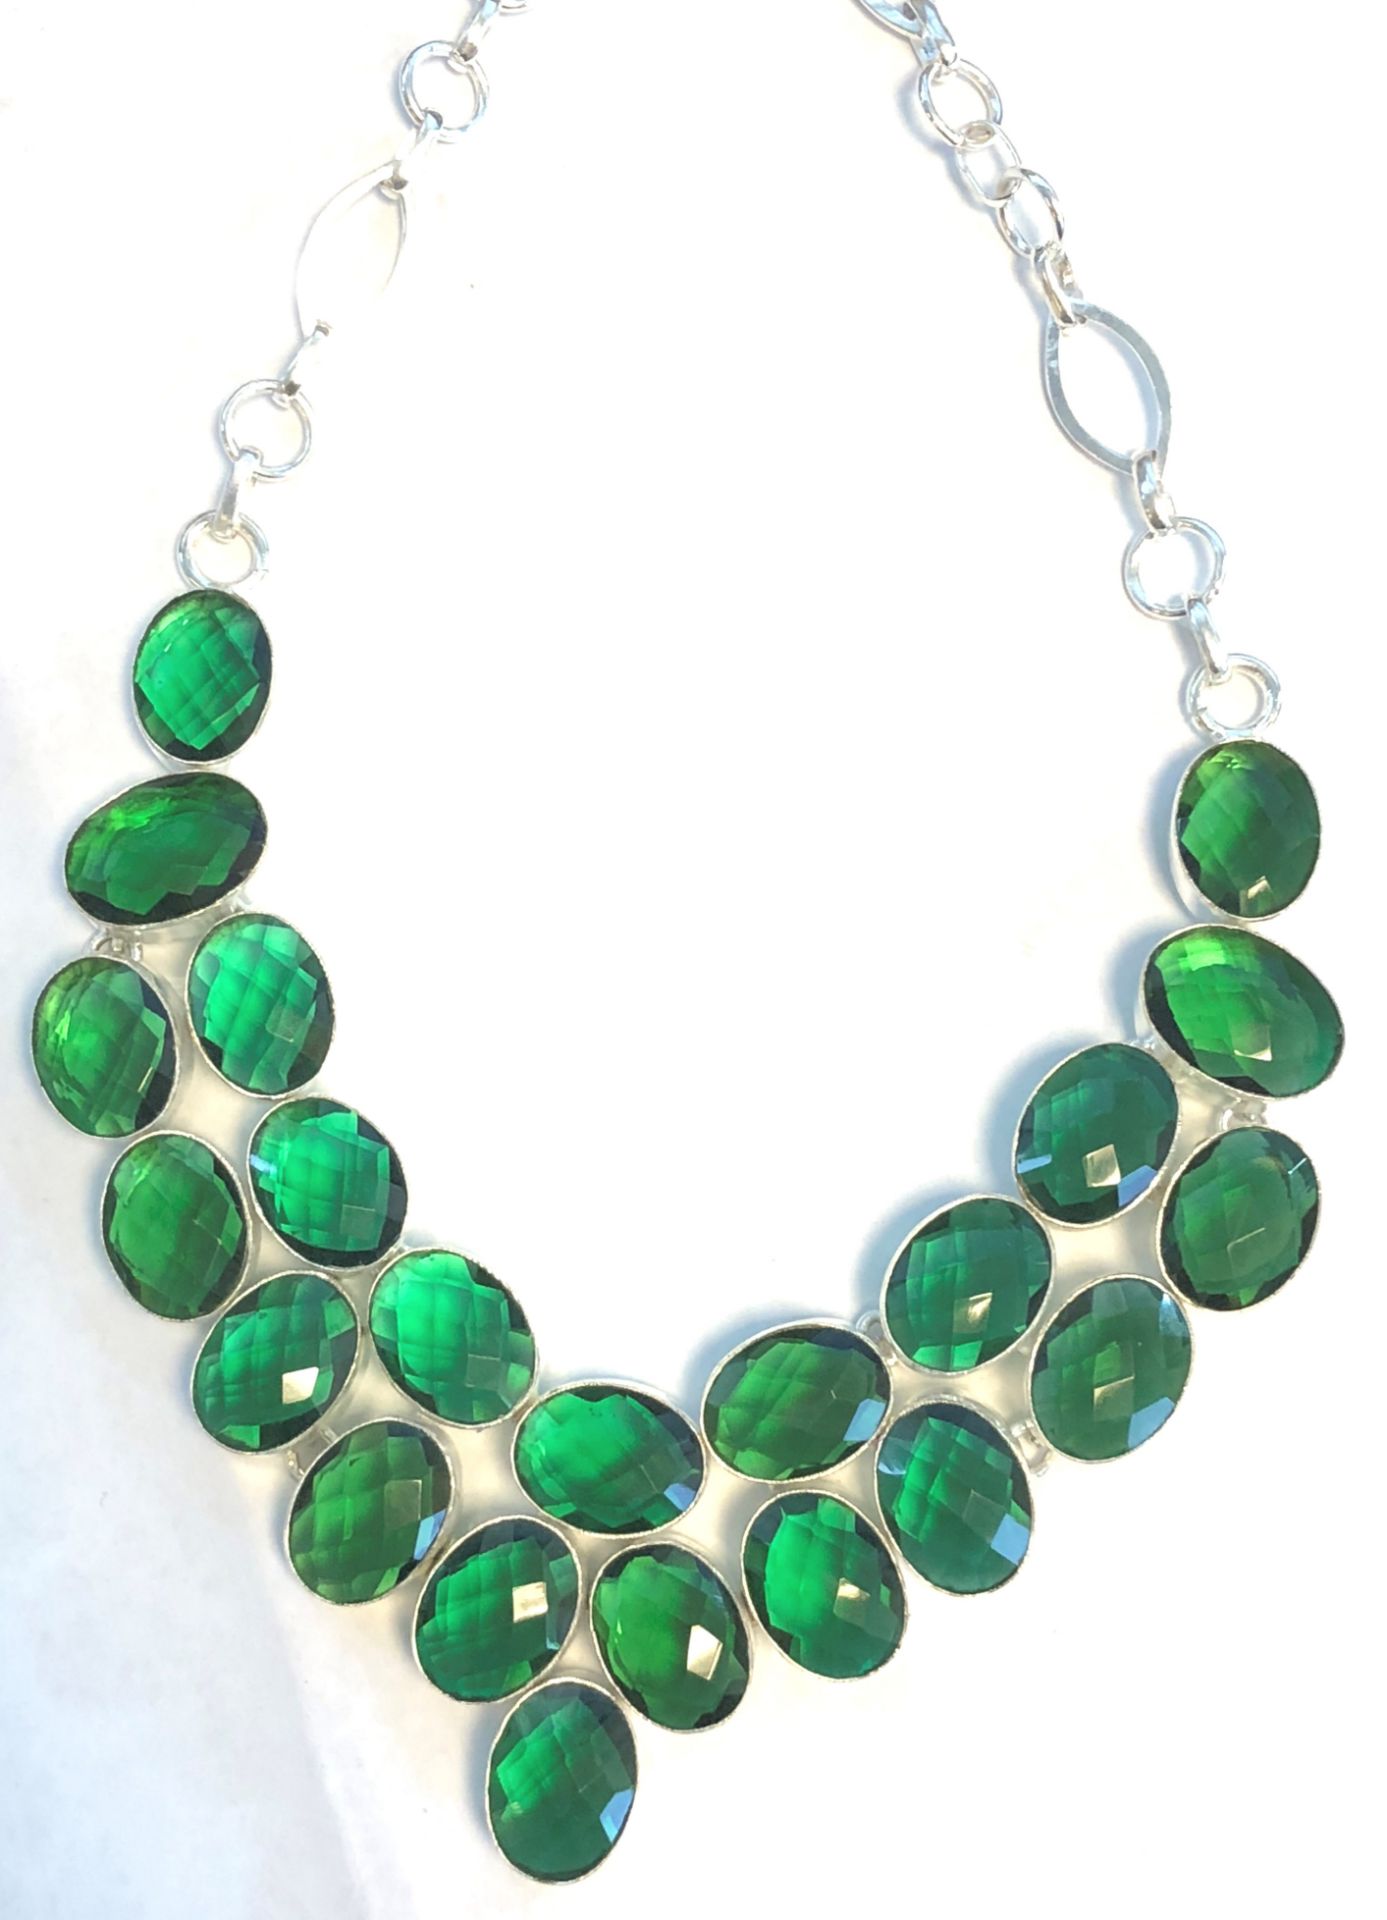 3 x Stunning Statement Necklaces. Sterling Silver with Created coloured stones - Image 2 of 4